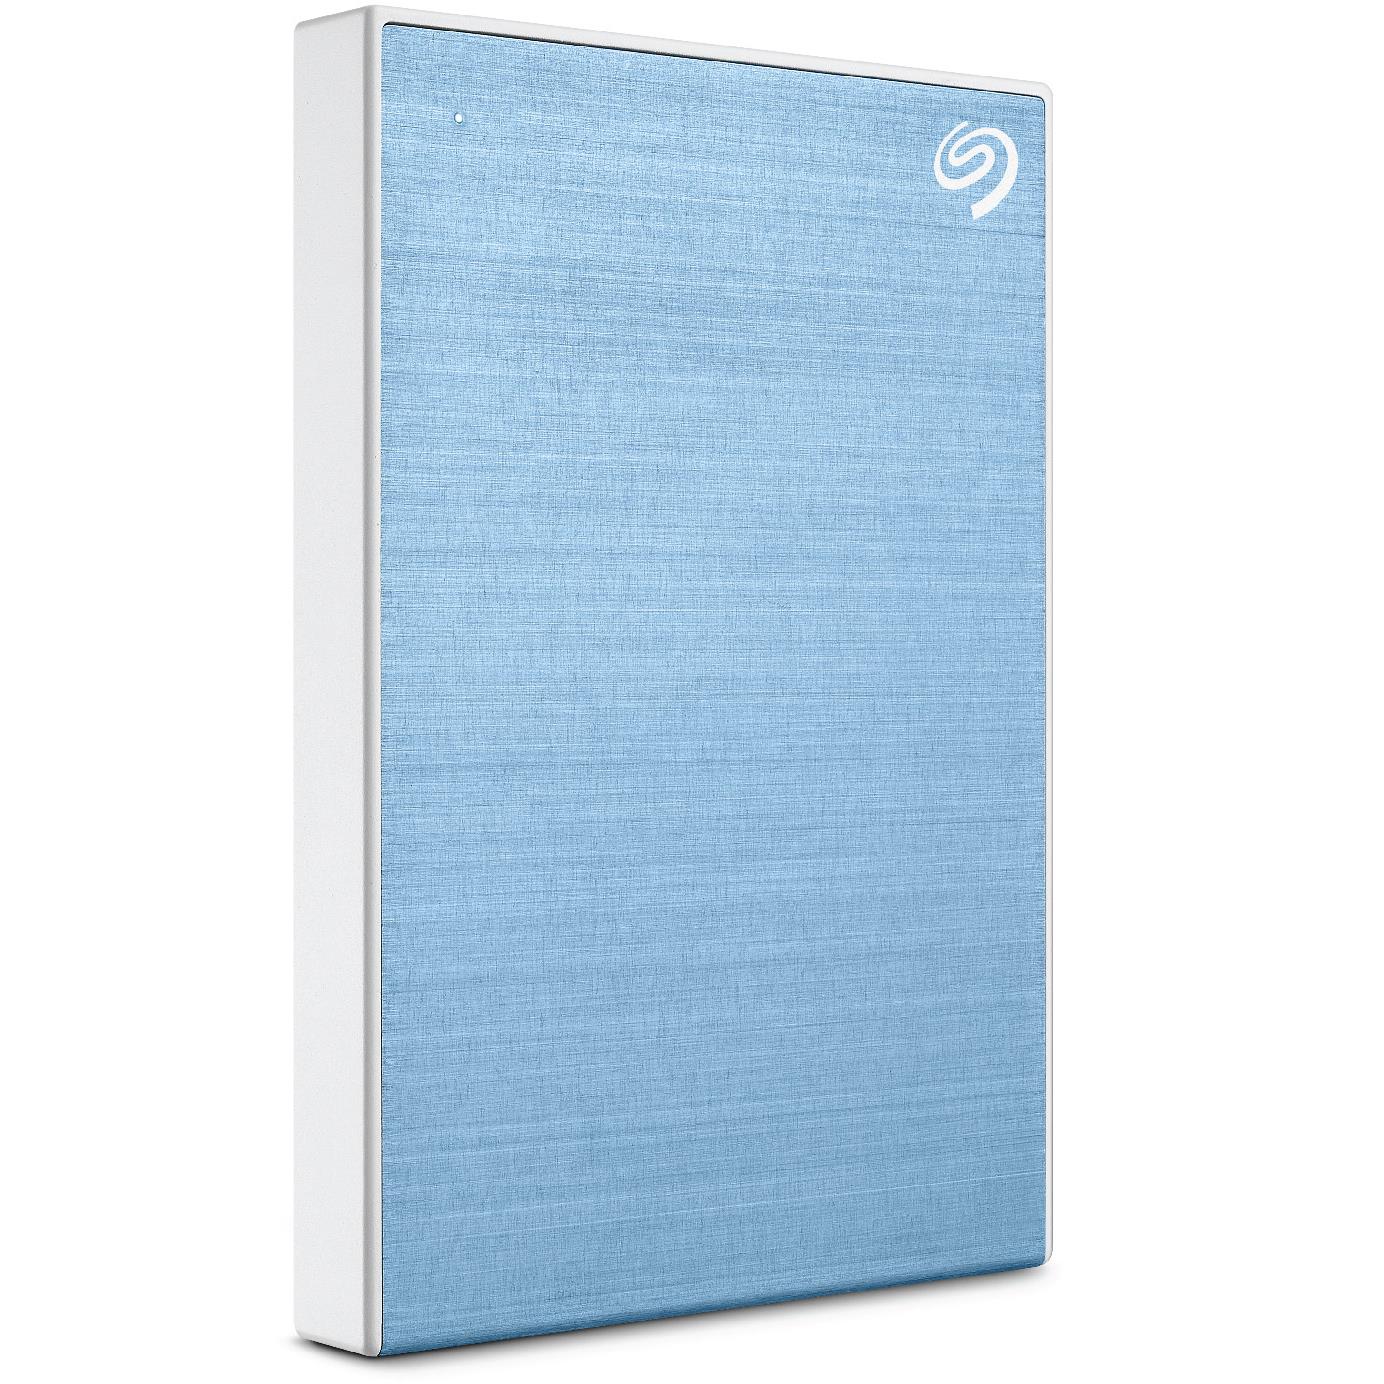 seagate one touch portable 2tb hard drive (blue)